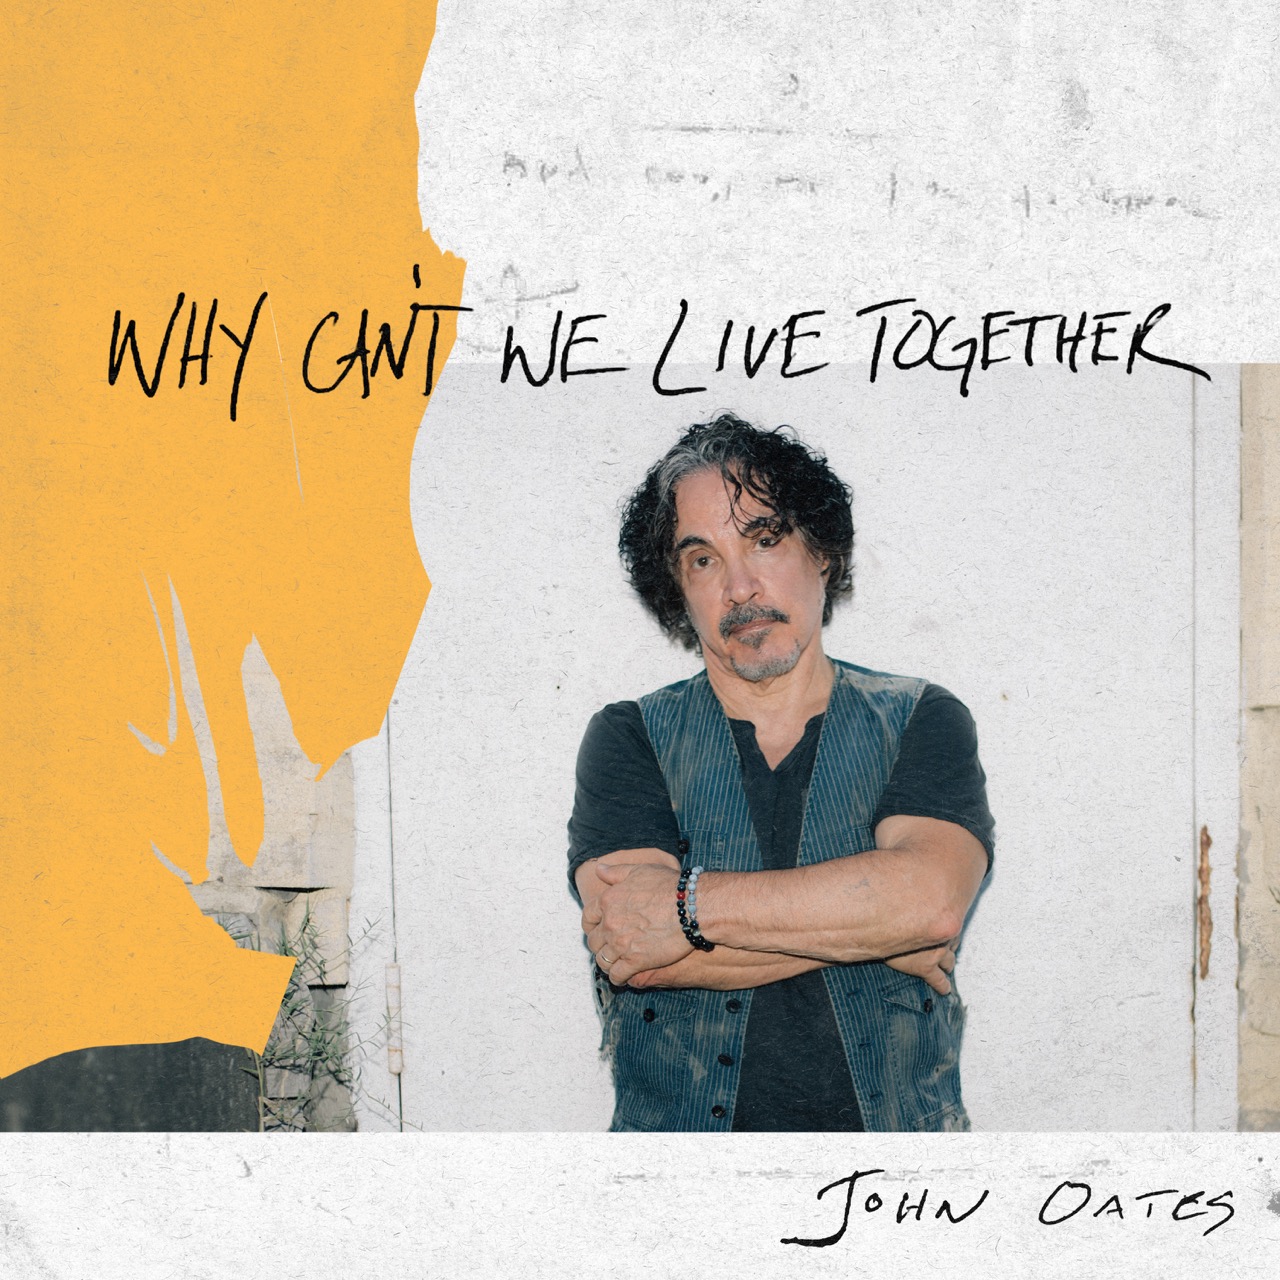 Why Can't We Live Together by John Oates